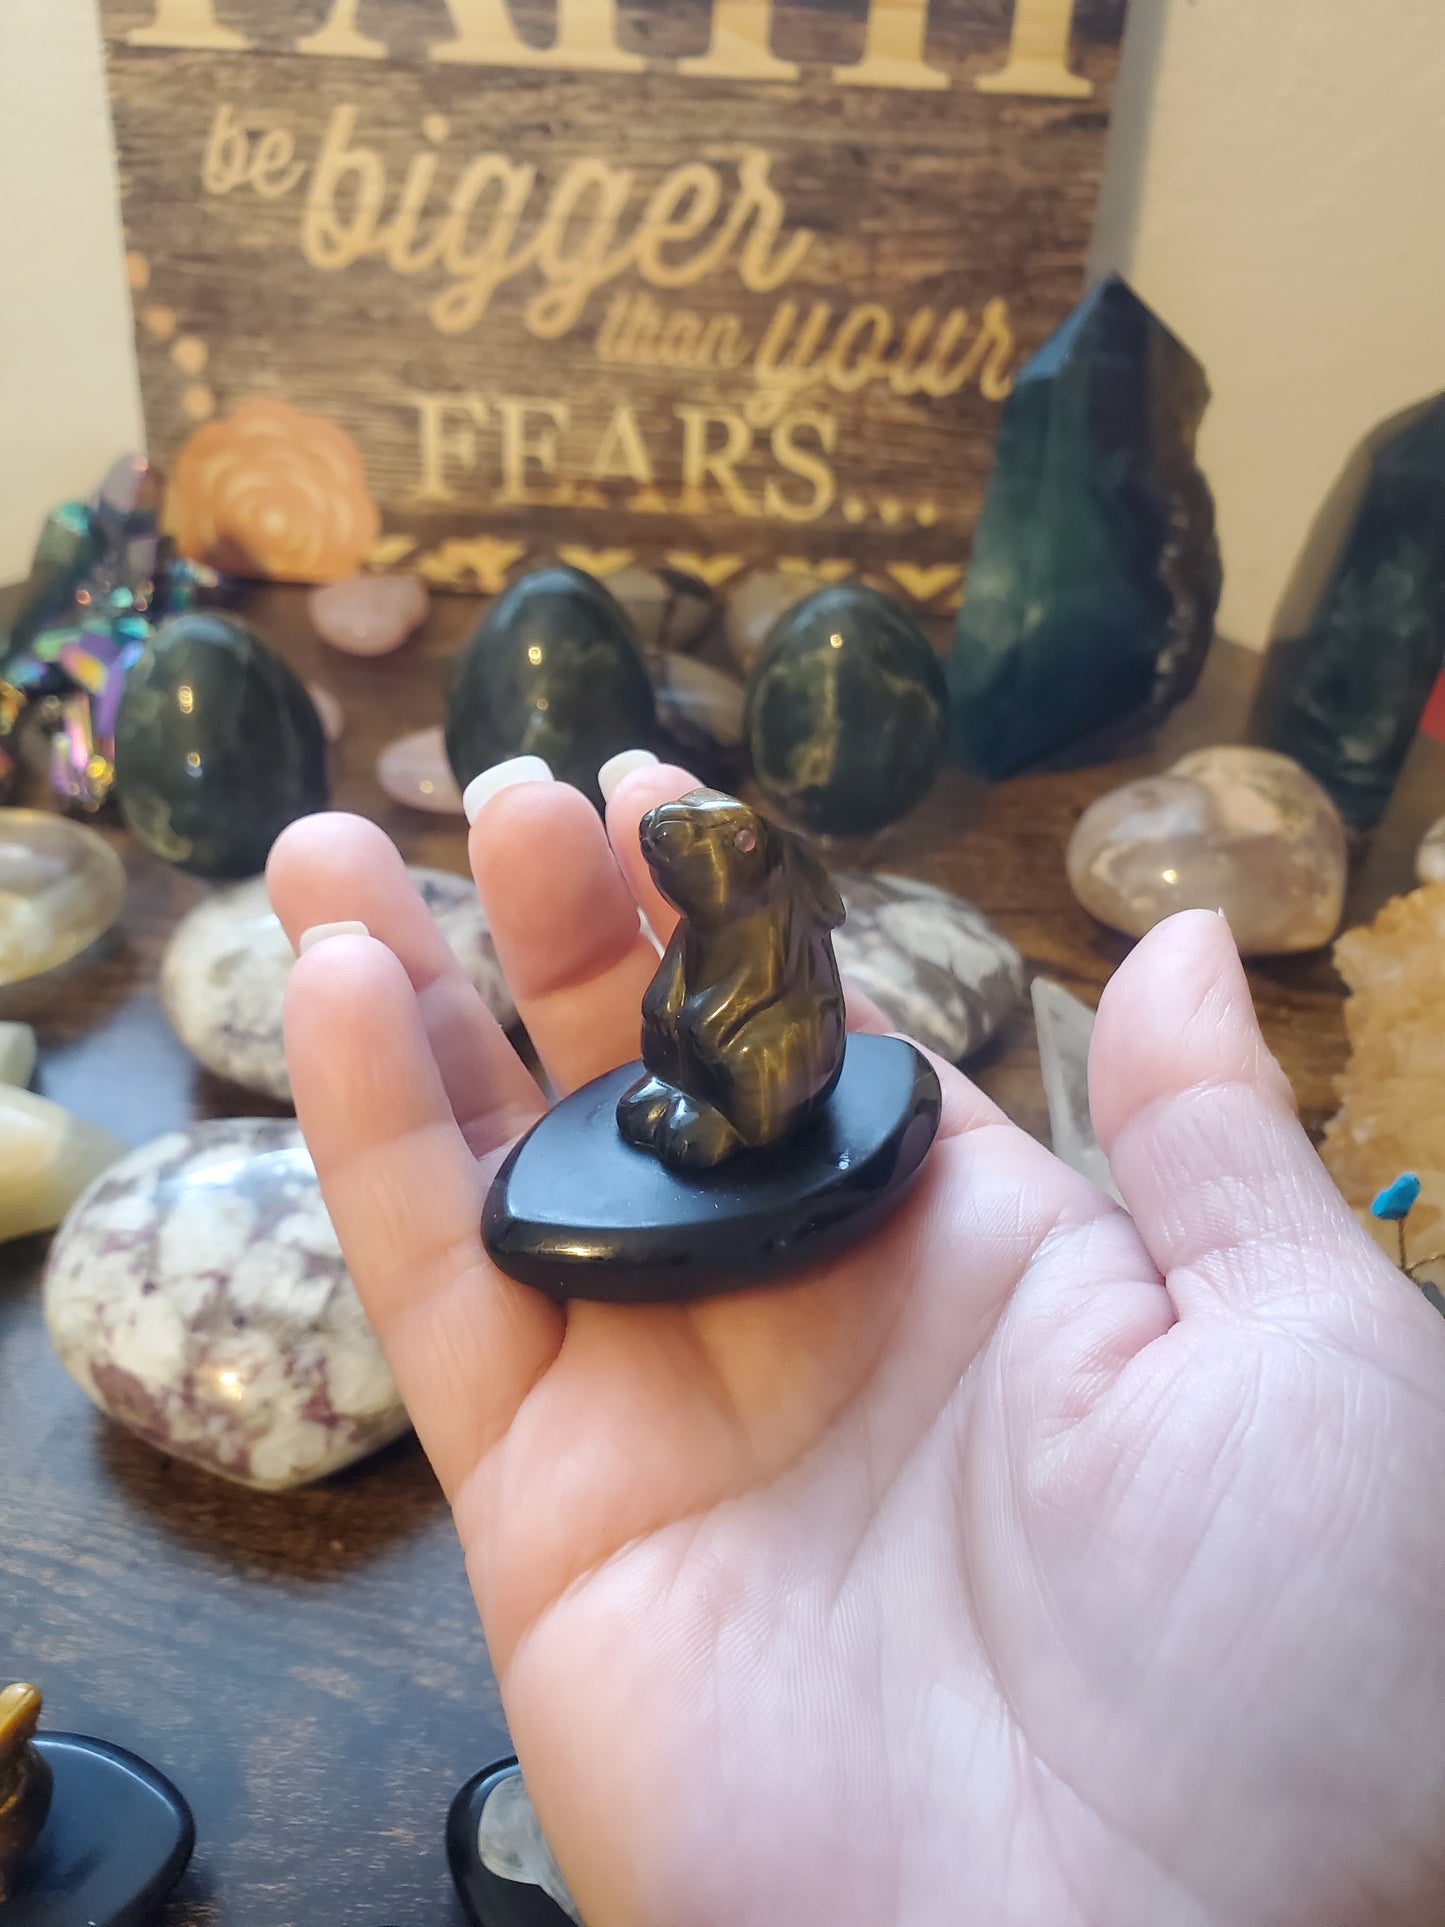 Owl figurine and Bunny figurines Tiger’s eye, Clear Quartz, and Rhodonite Crystal on Obsidian base - Healing Plants Miami